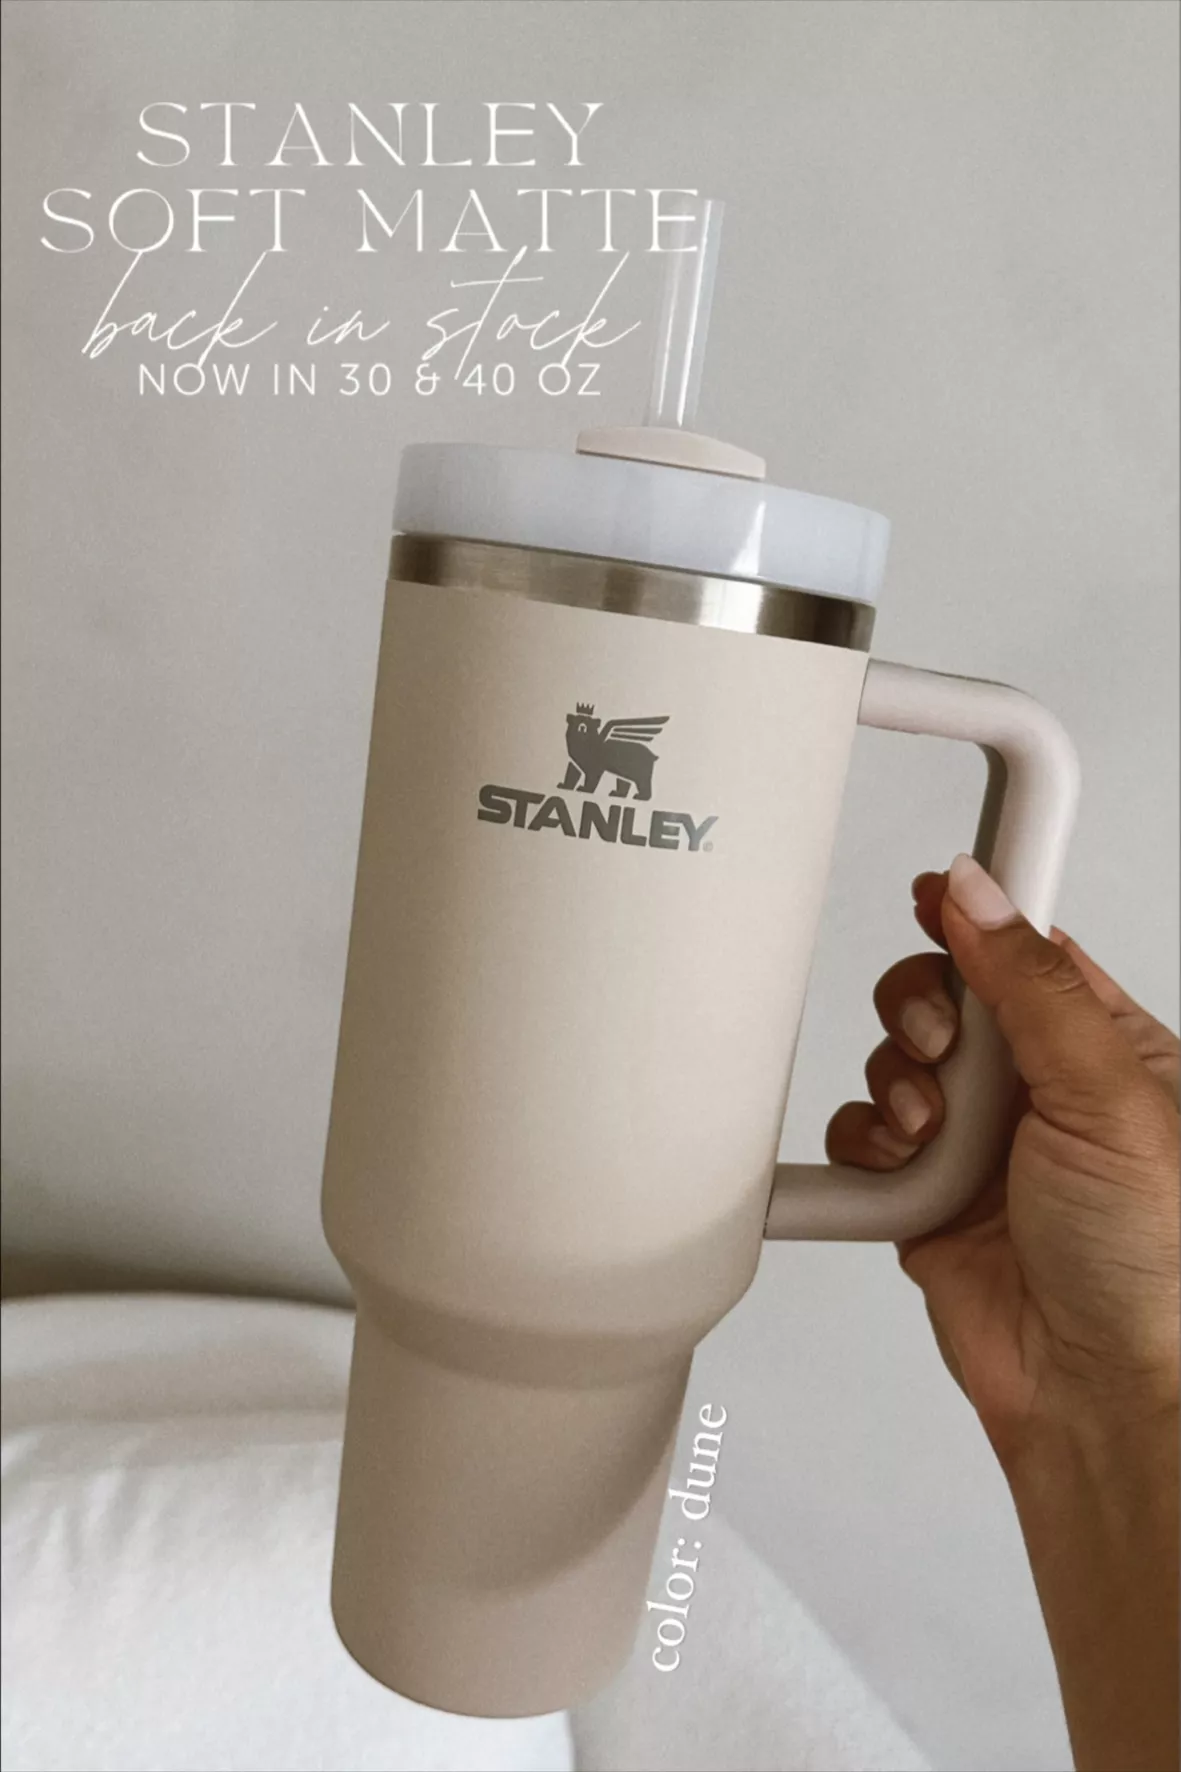 Exciting Soft Matte News - Stanley